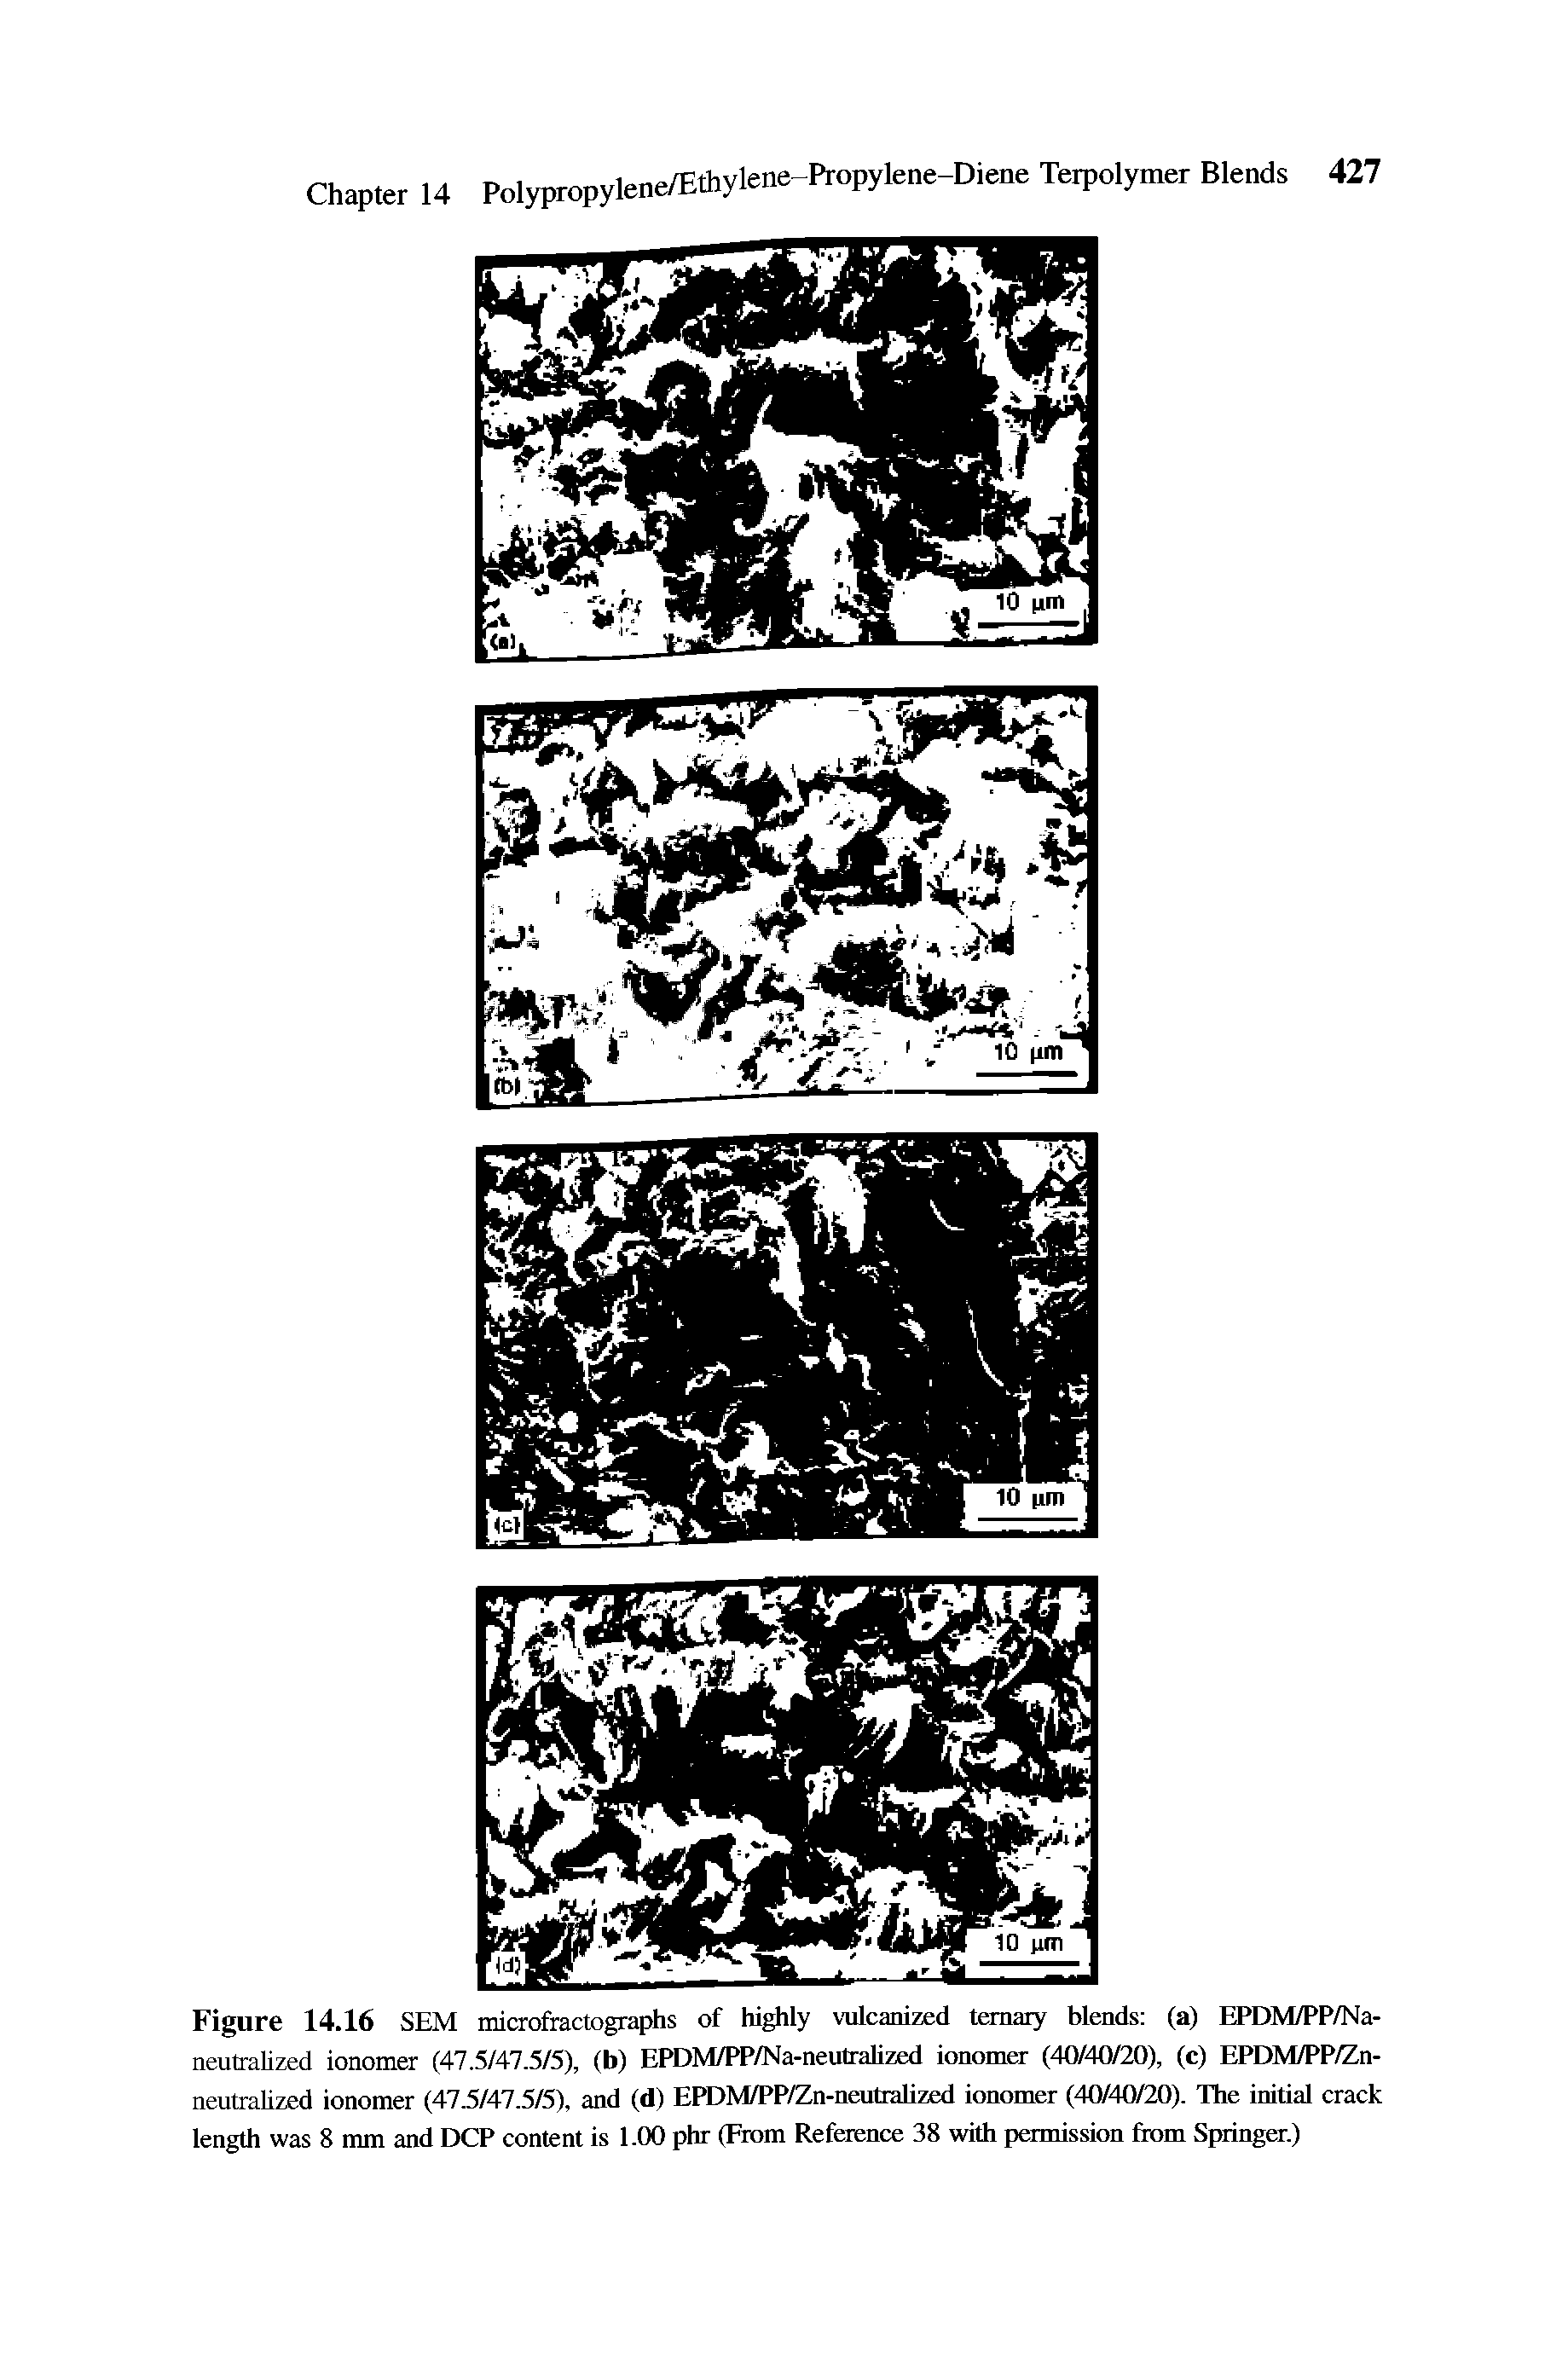 Figure 14.16 SEM microfractographs of highly vulcanized ternary blends (a) EPDM/PP/Na-neutraUzed ionomer (47.5/47.5/5), (b) EPDM/PP/Na-neutralized ionomer (40/40/20), (c) EPDM/PP/Zn-neutrahzed ionomer (47.5/47.5/5), and (d) EPDM/PP/Zn-neutraUzed ionomer (40/40/20). The initial crack length was 8 mm and DCP content is 1.00 phr (From Reference 38 with permission from Springer.)...